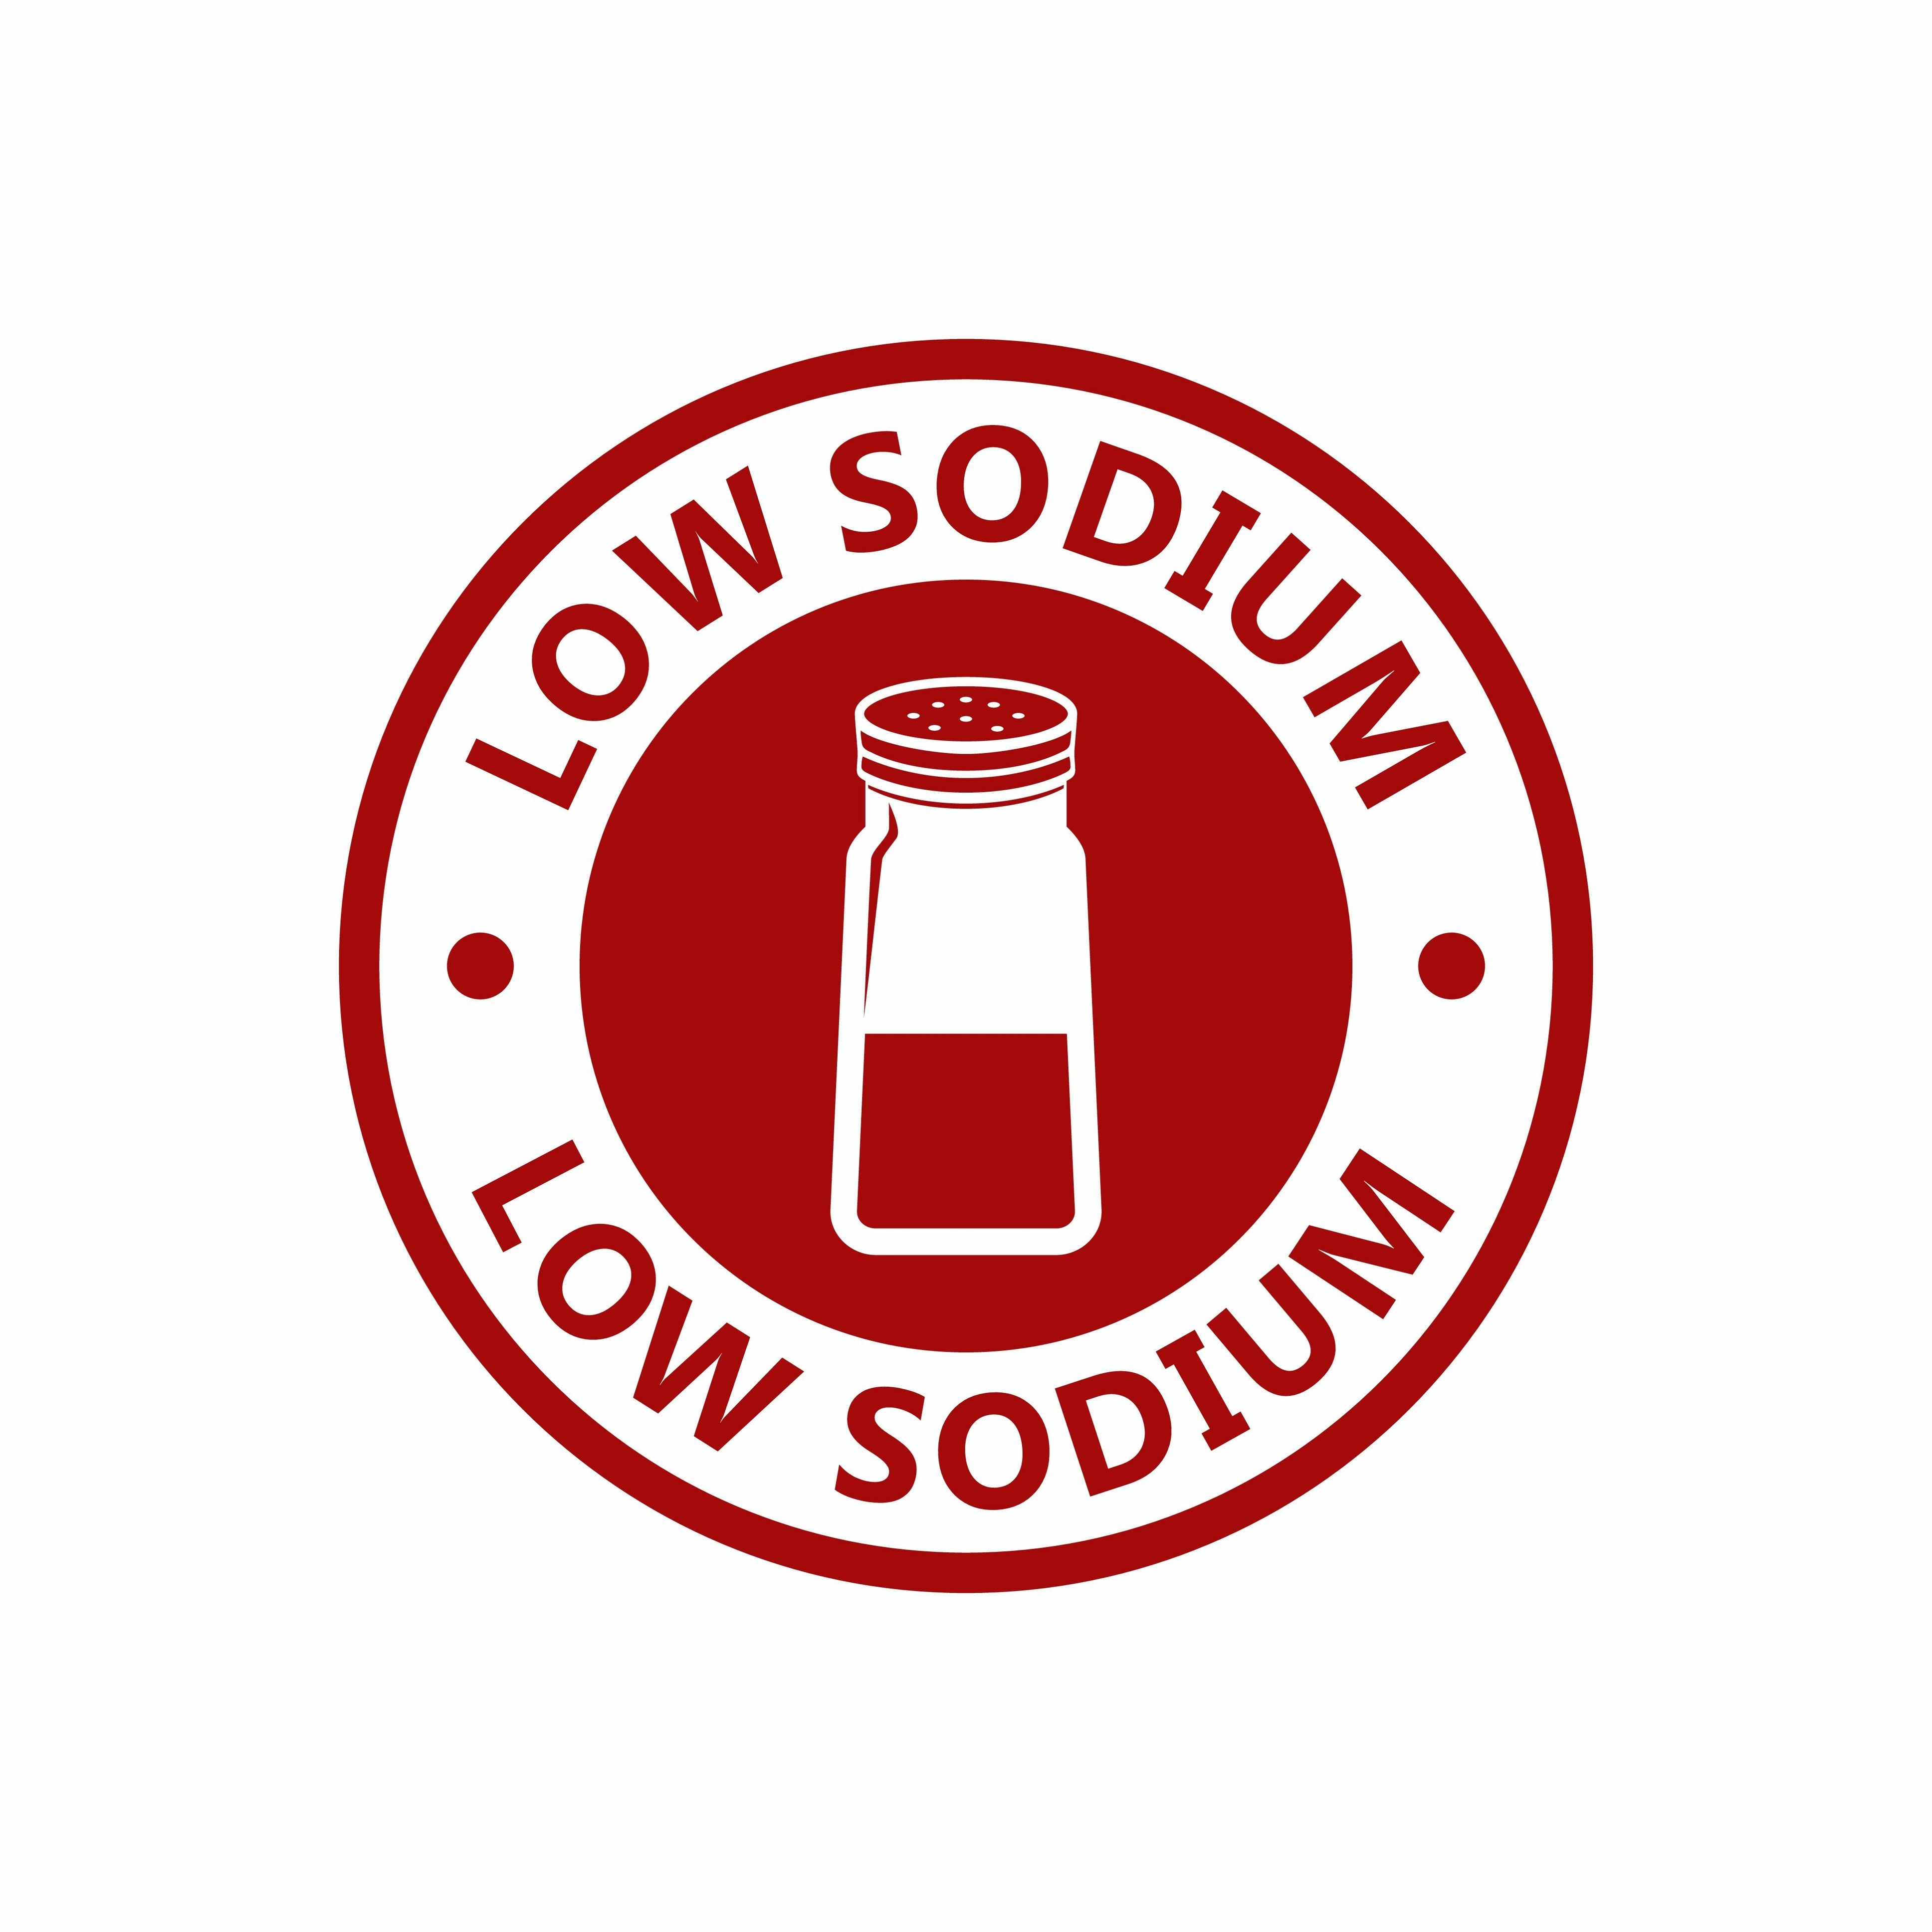 Low-sodium oxybate contains over 90% less sodium than a high-sodium oxybate regimen | Image Credit: Nickpd - stock.adobe.com